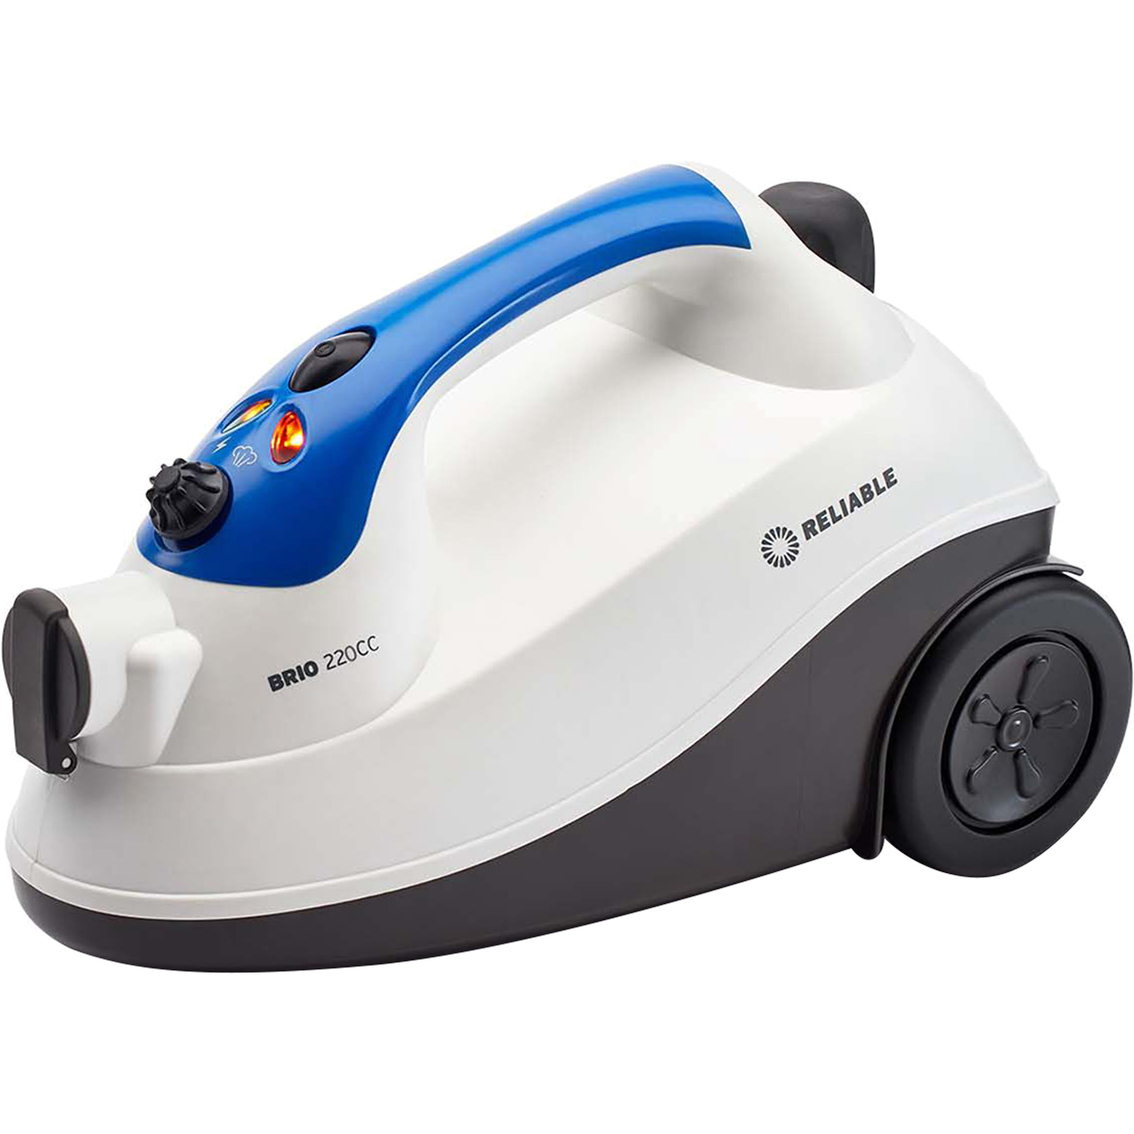 Reliable Brio 220CC Canister Steam Cleaner - Image 2 of 7